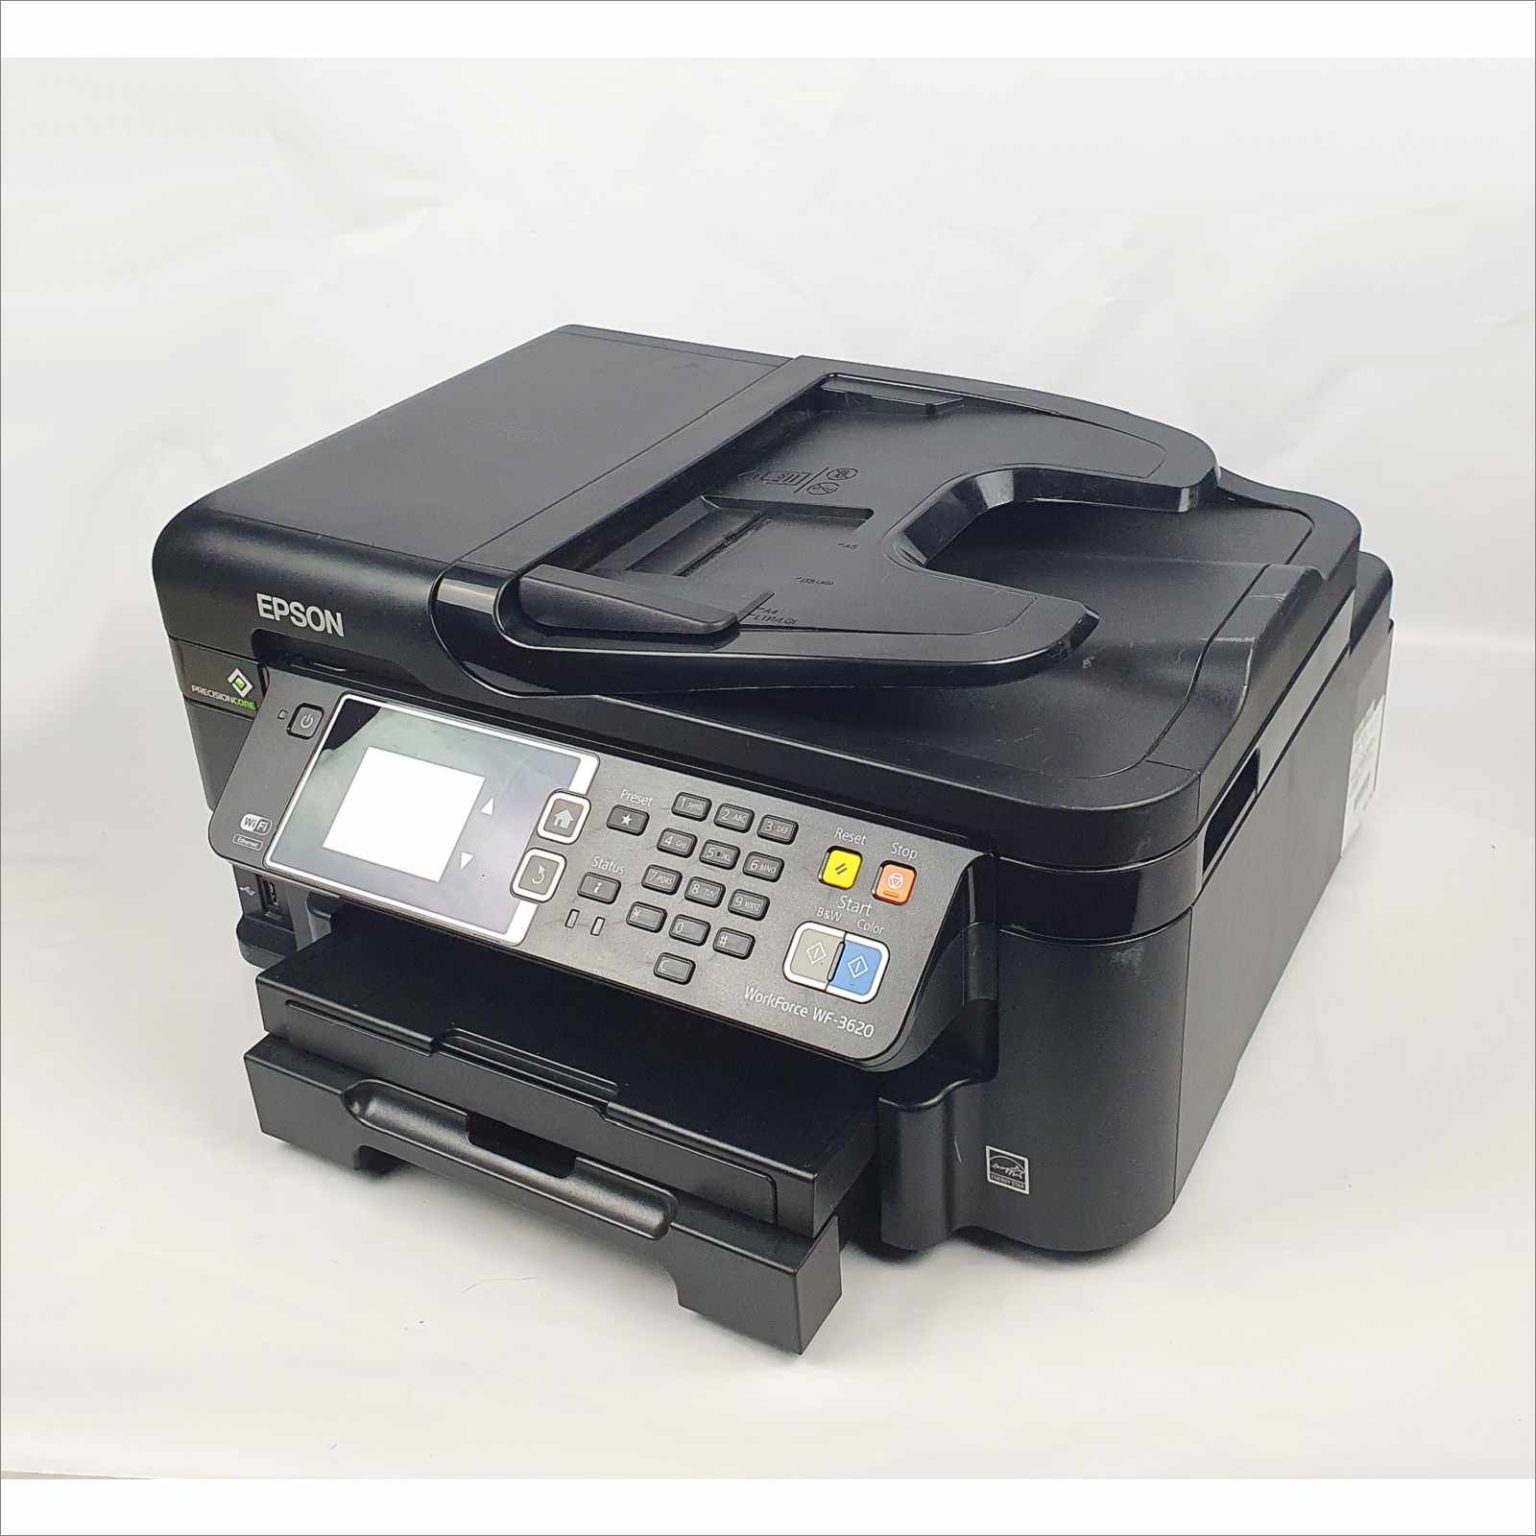 Epson Workforce Wf 3620 All In One Printer Fast Scanner C481d Computer Network Telecom 6161